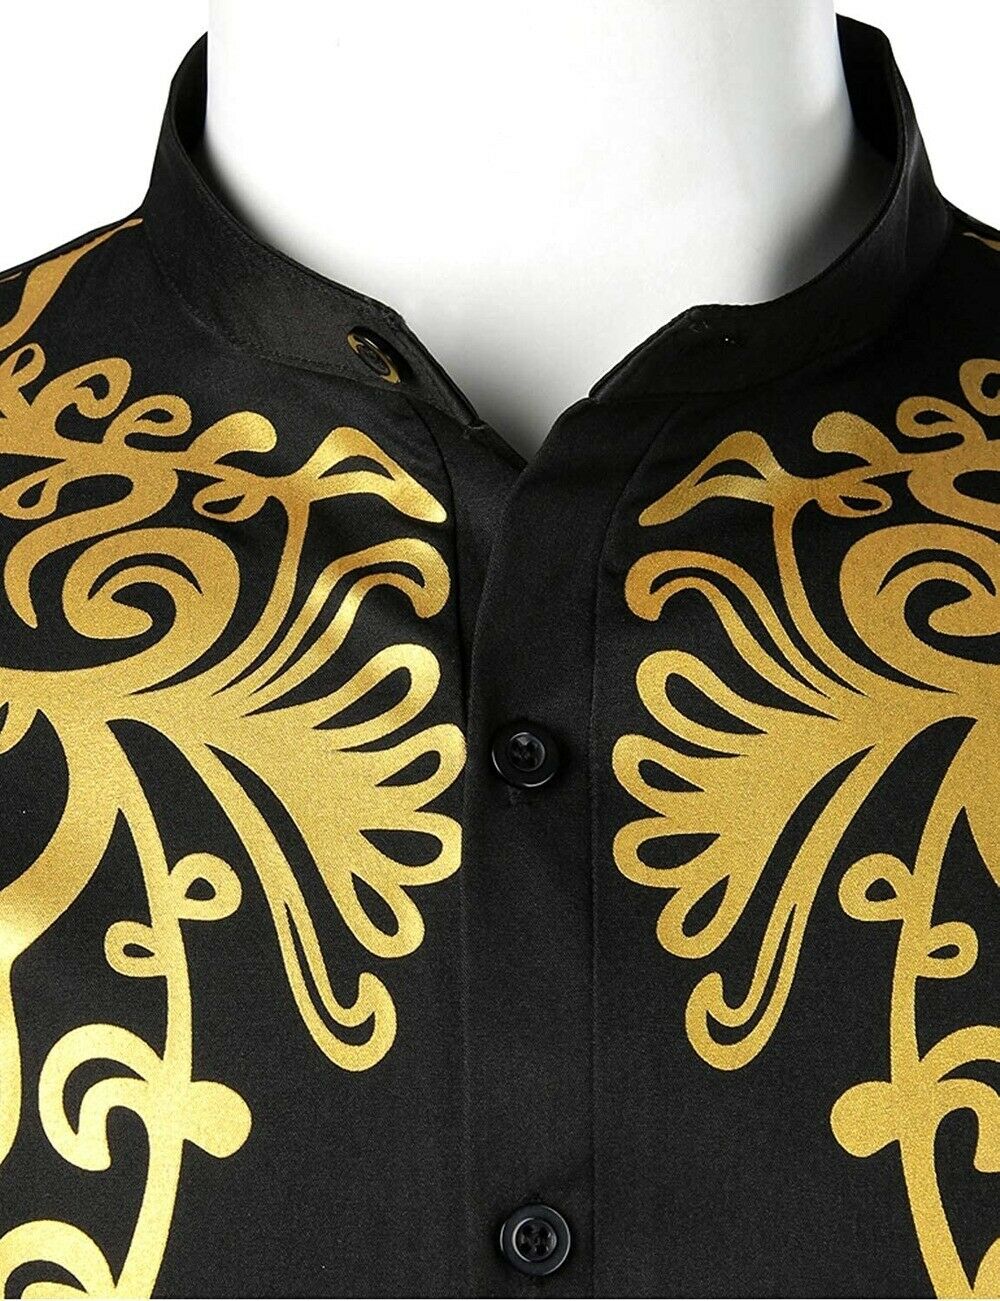 Men’s Luxury African Traditional Gold Printed Dashiki Casual Blouse Top Shirt